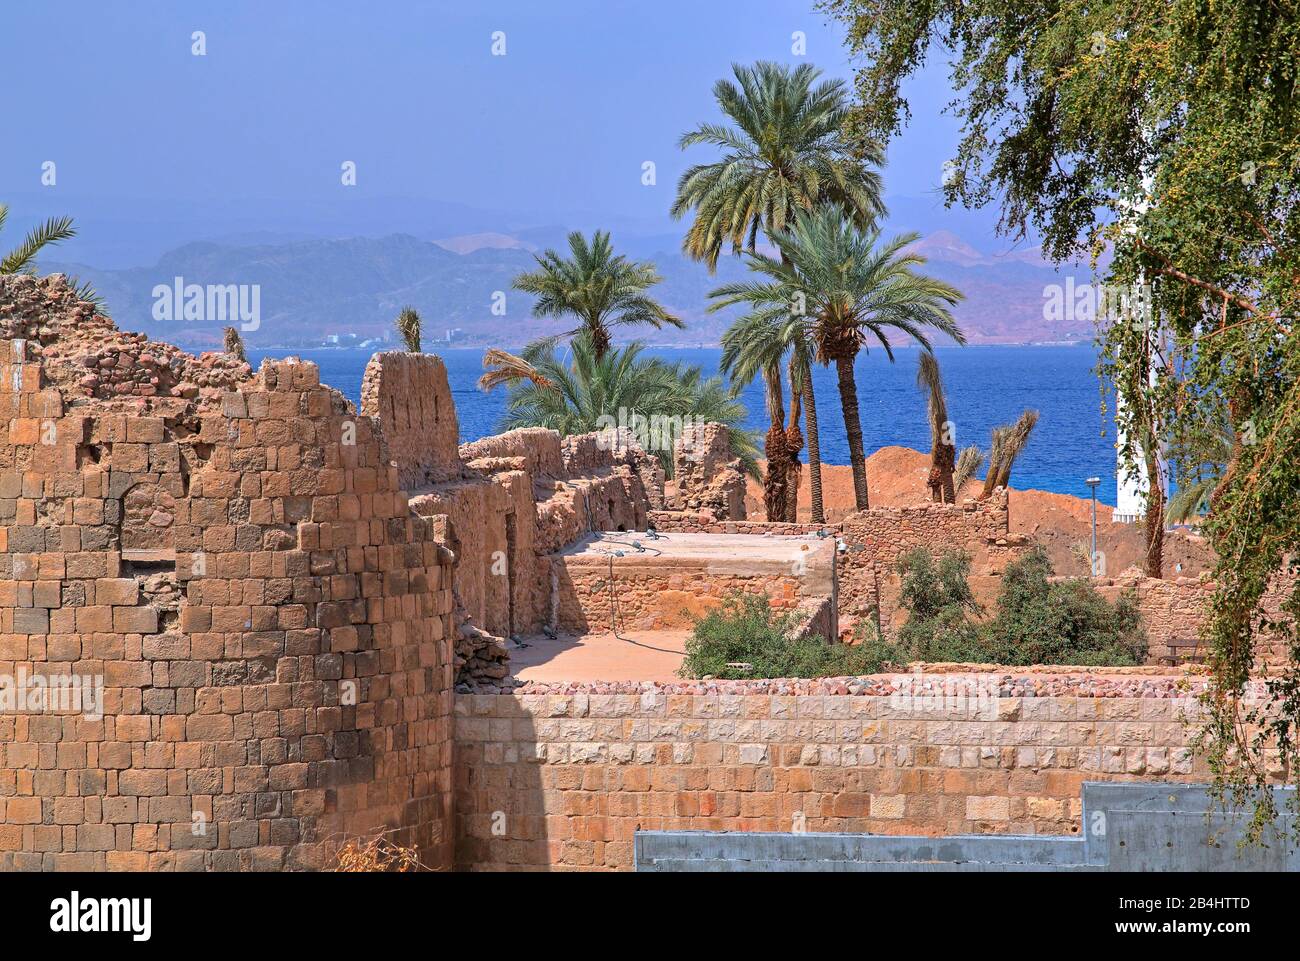 Historical ruins of the fort with date palms by the sea. Akaba Aqaba, Gulf of Aqaba, Red Sea, Jordan Stock Photo